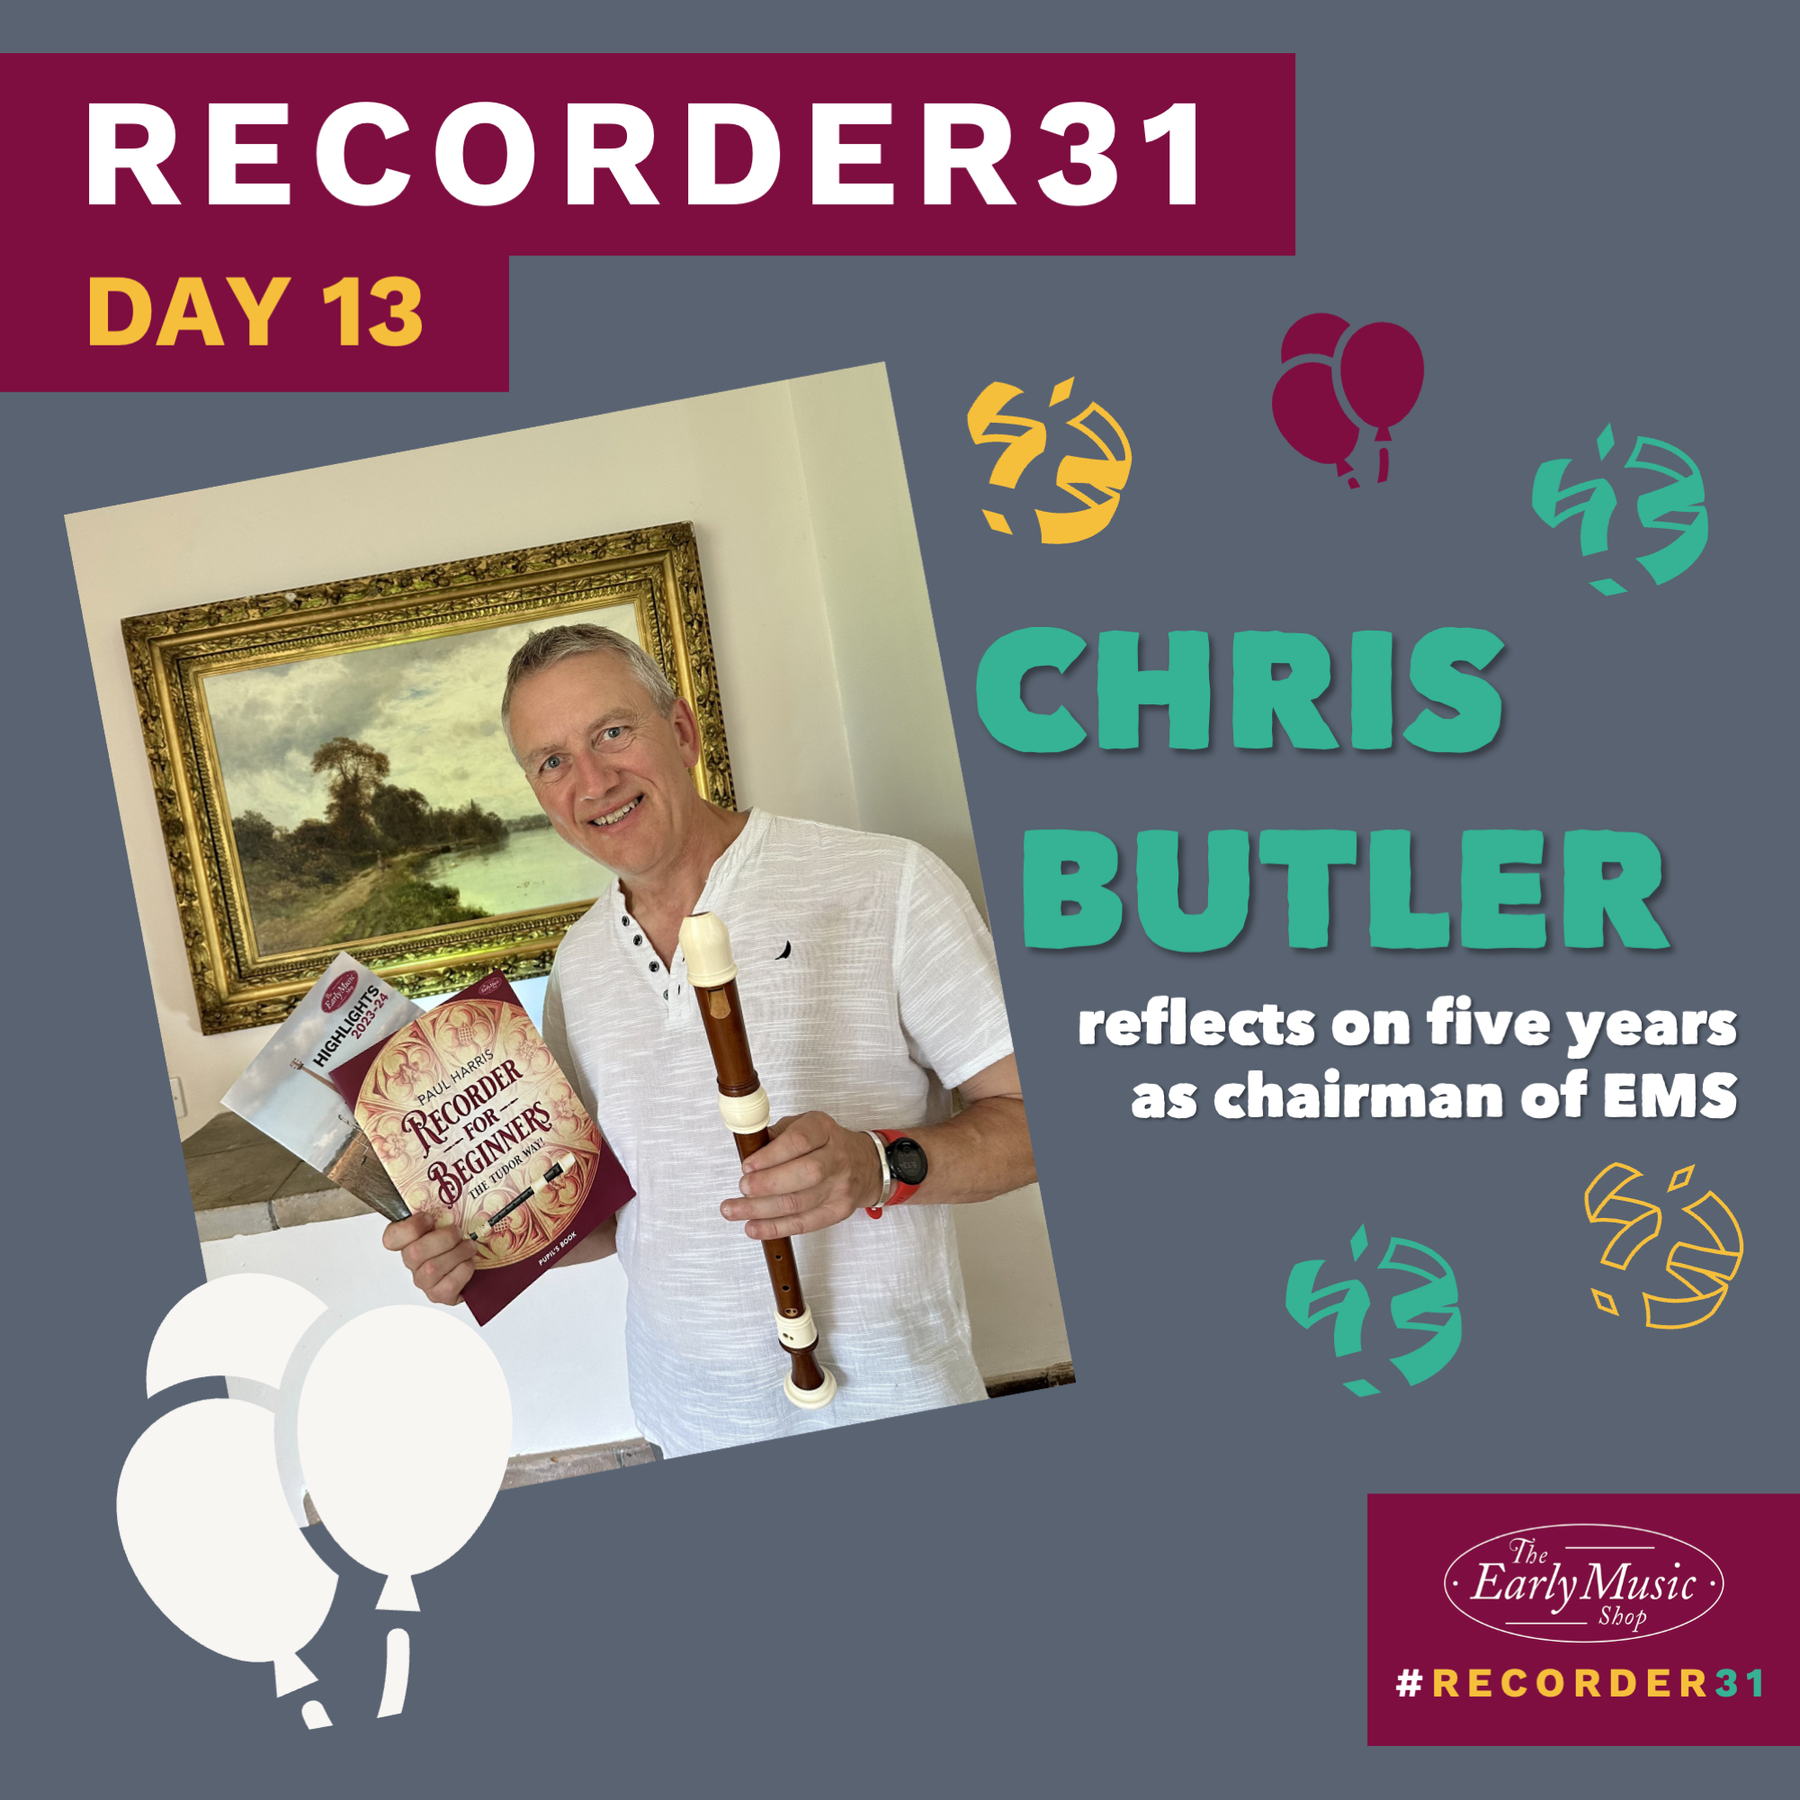 Recorder31 Day 13 | A Message from Chris Butler